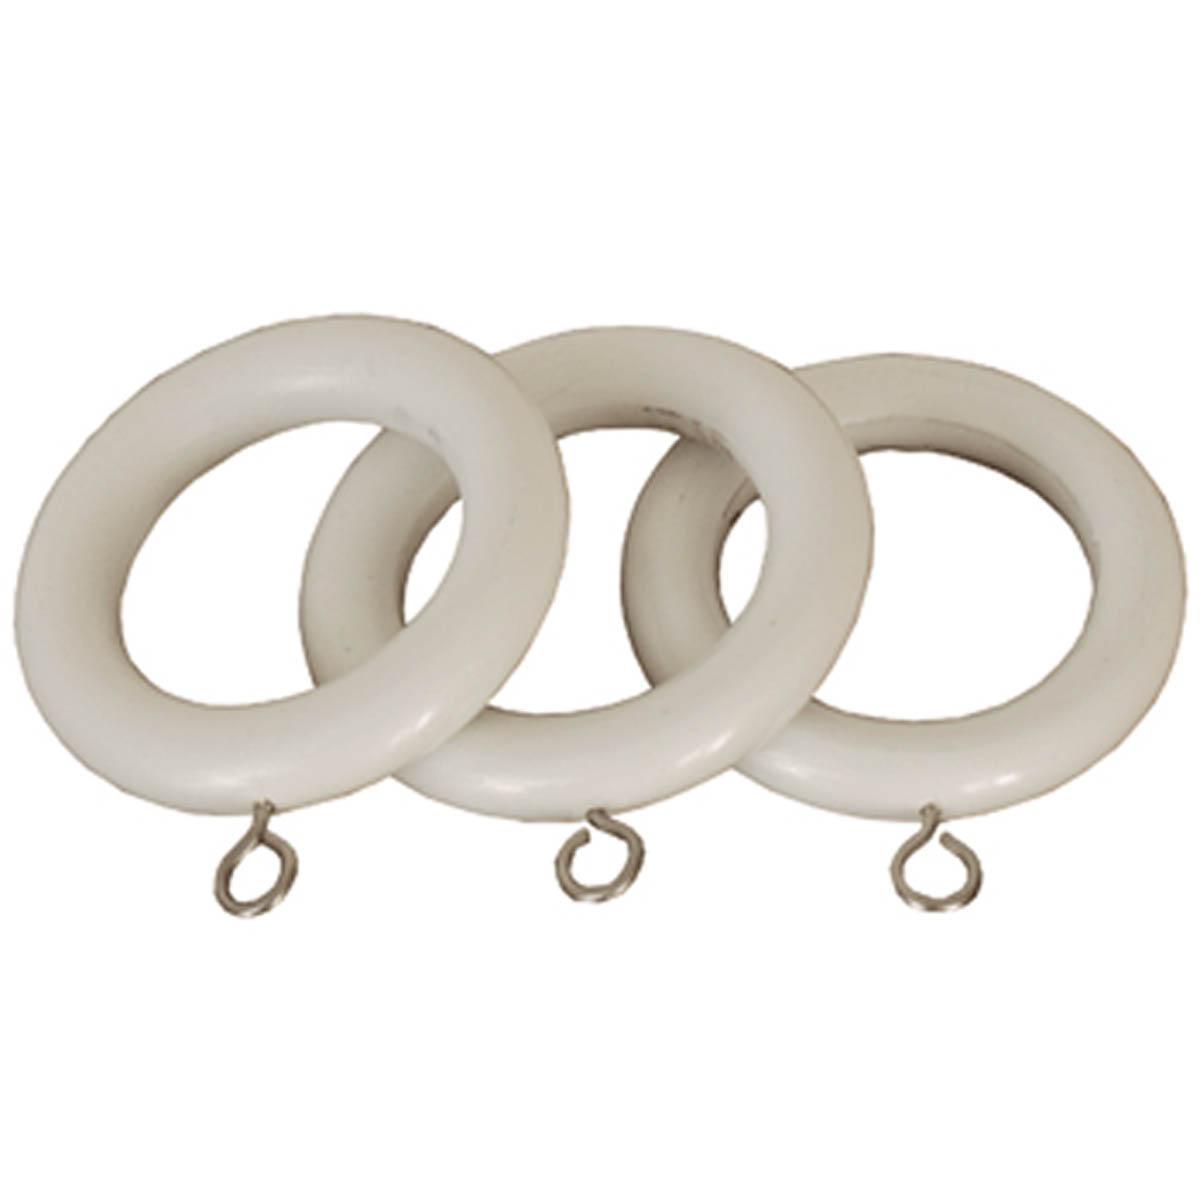 County 28mm Wooden Curtain Rings White